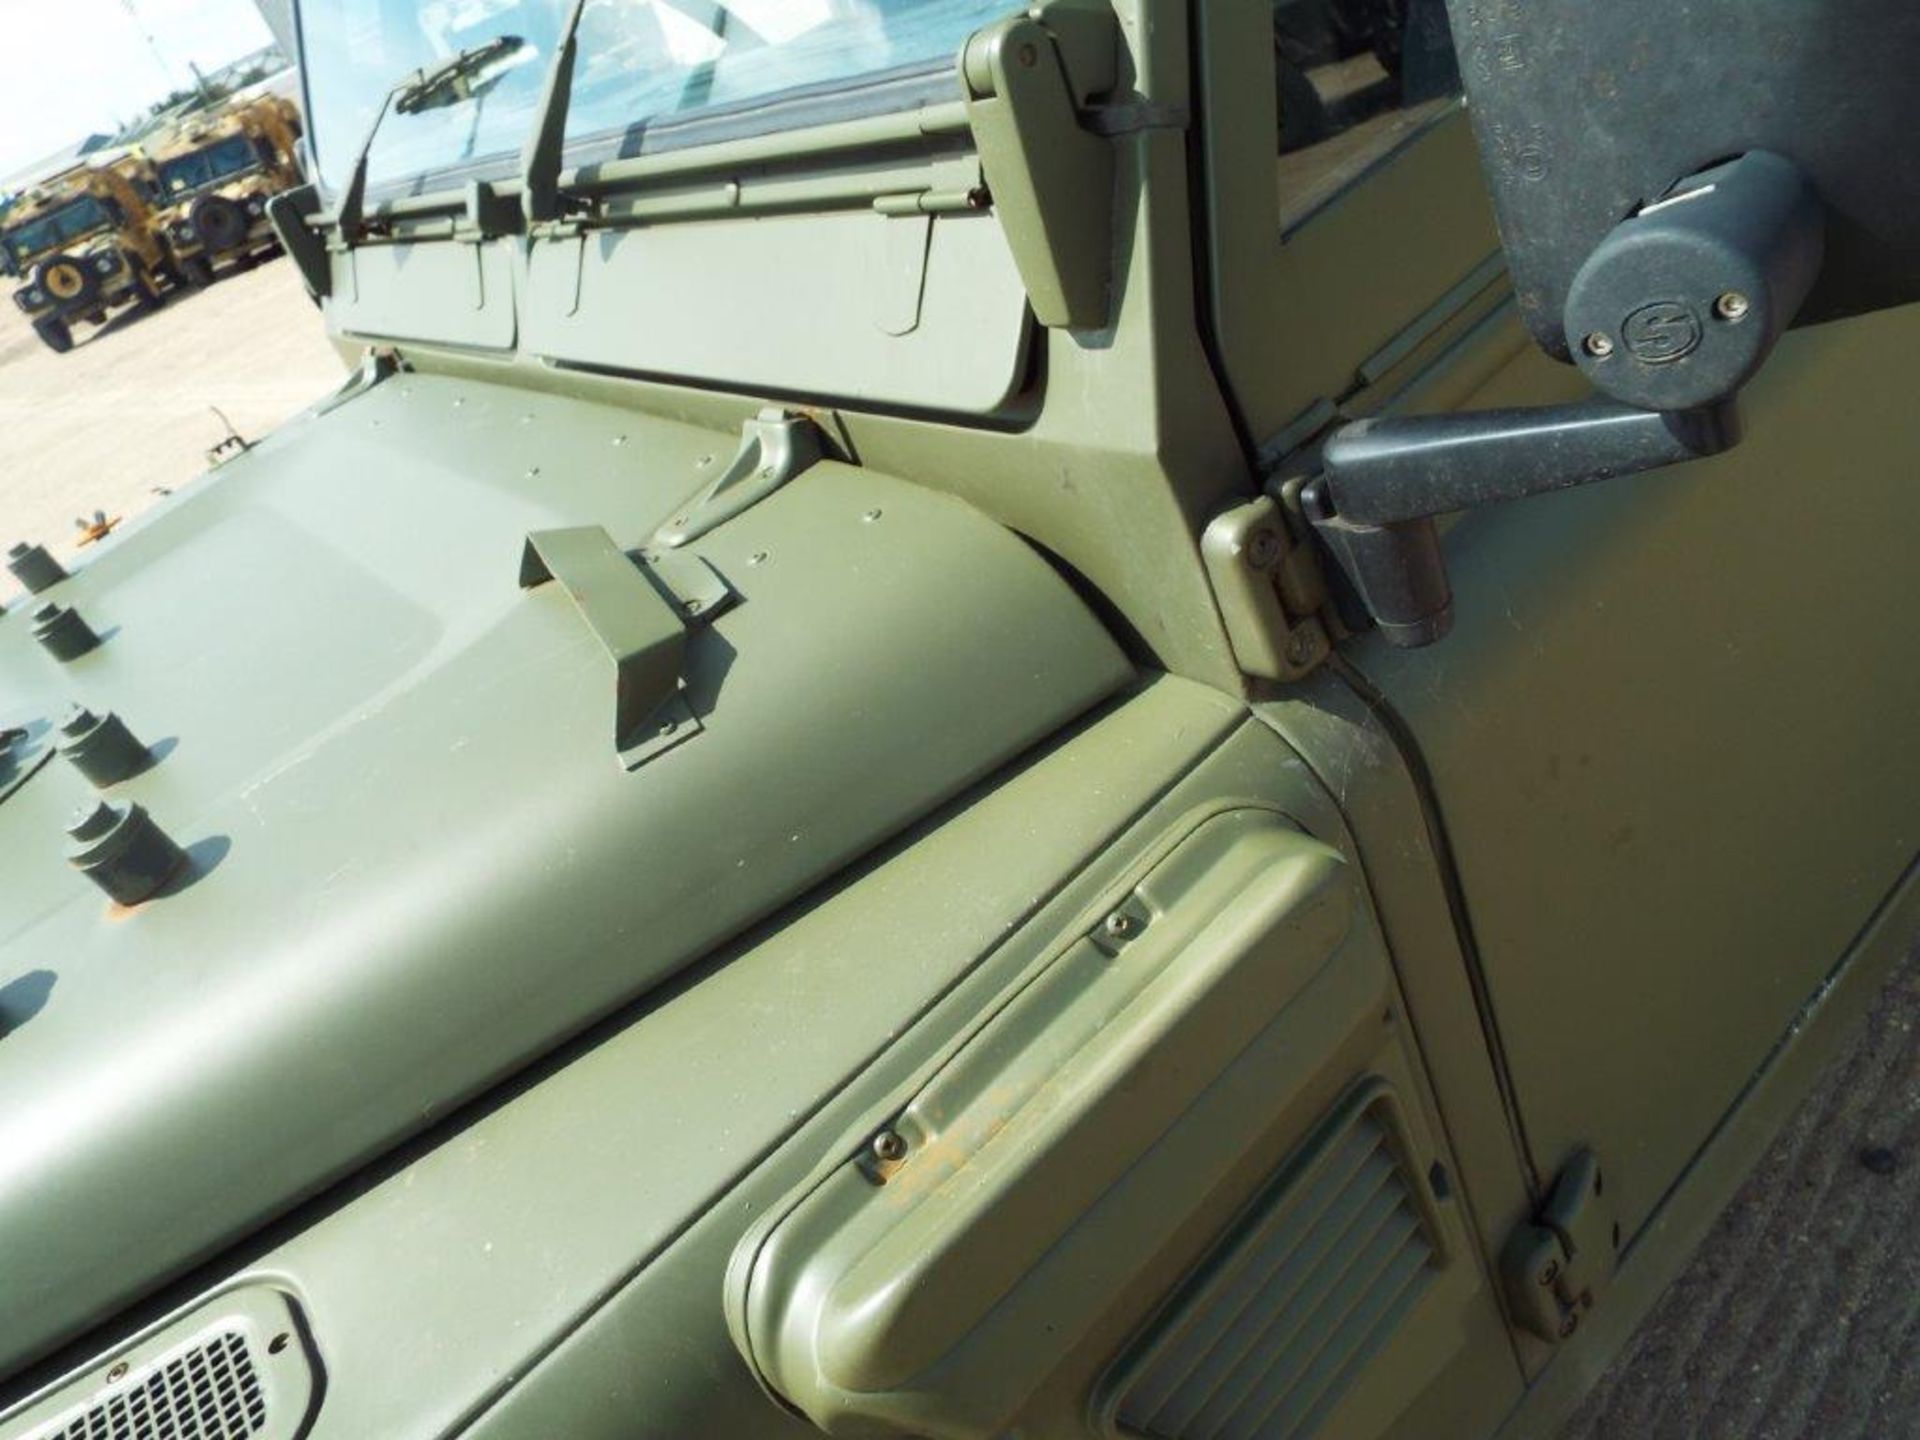 Military Specification Land Rover Wolf 110 Hard Top - Image 21 of 26